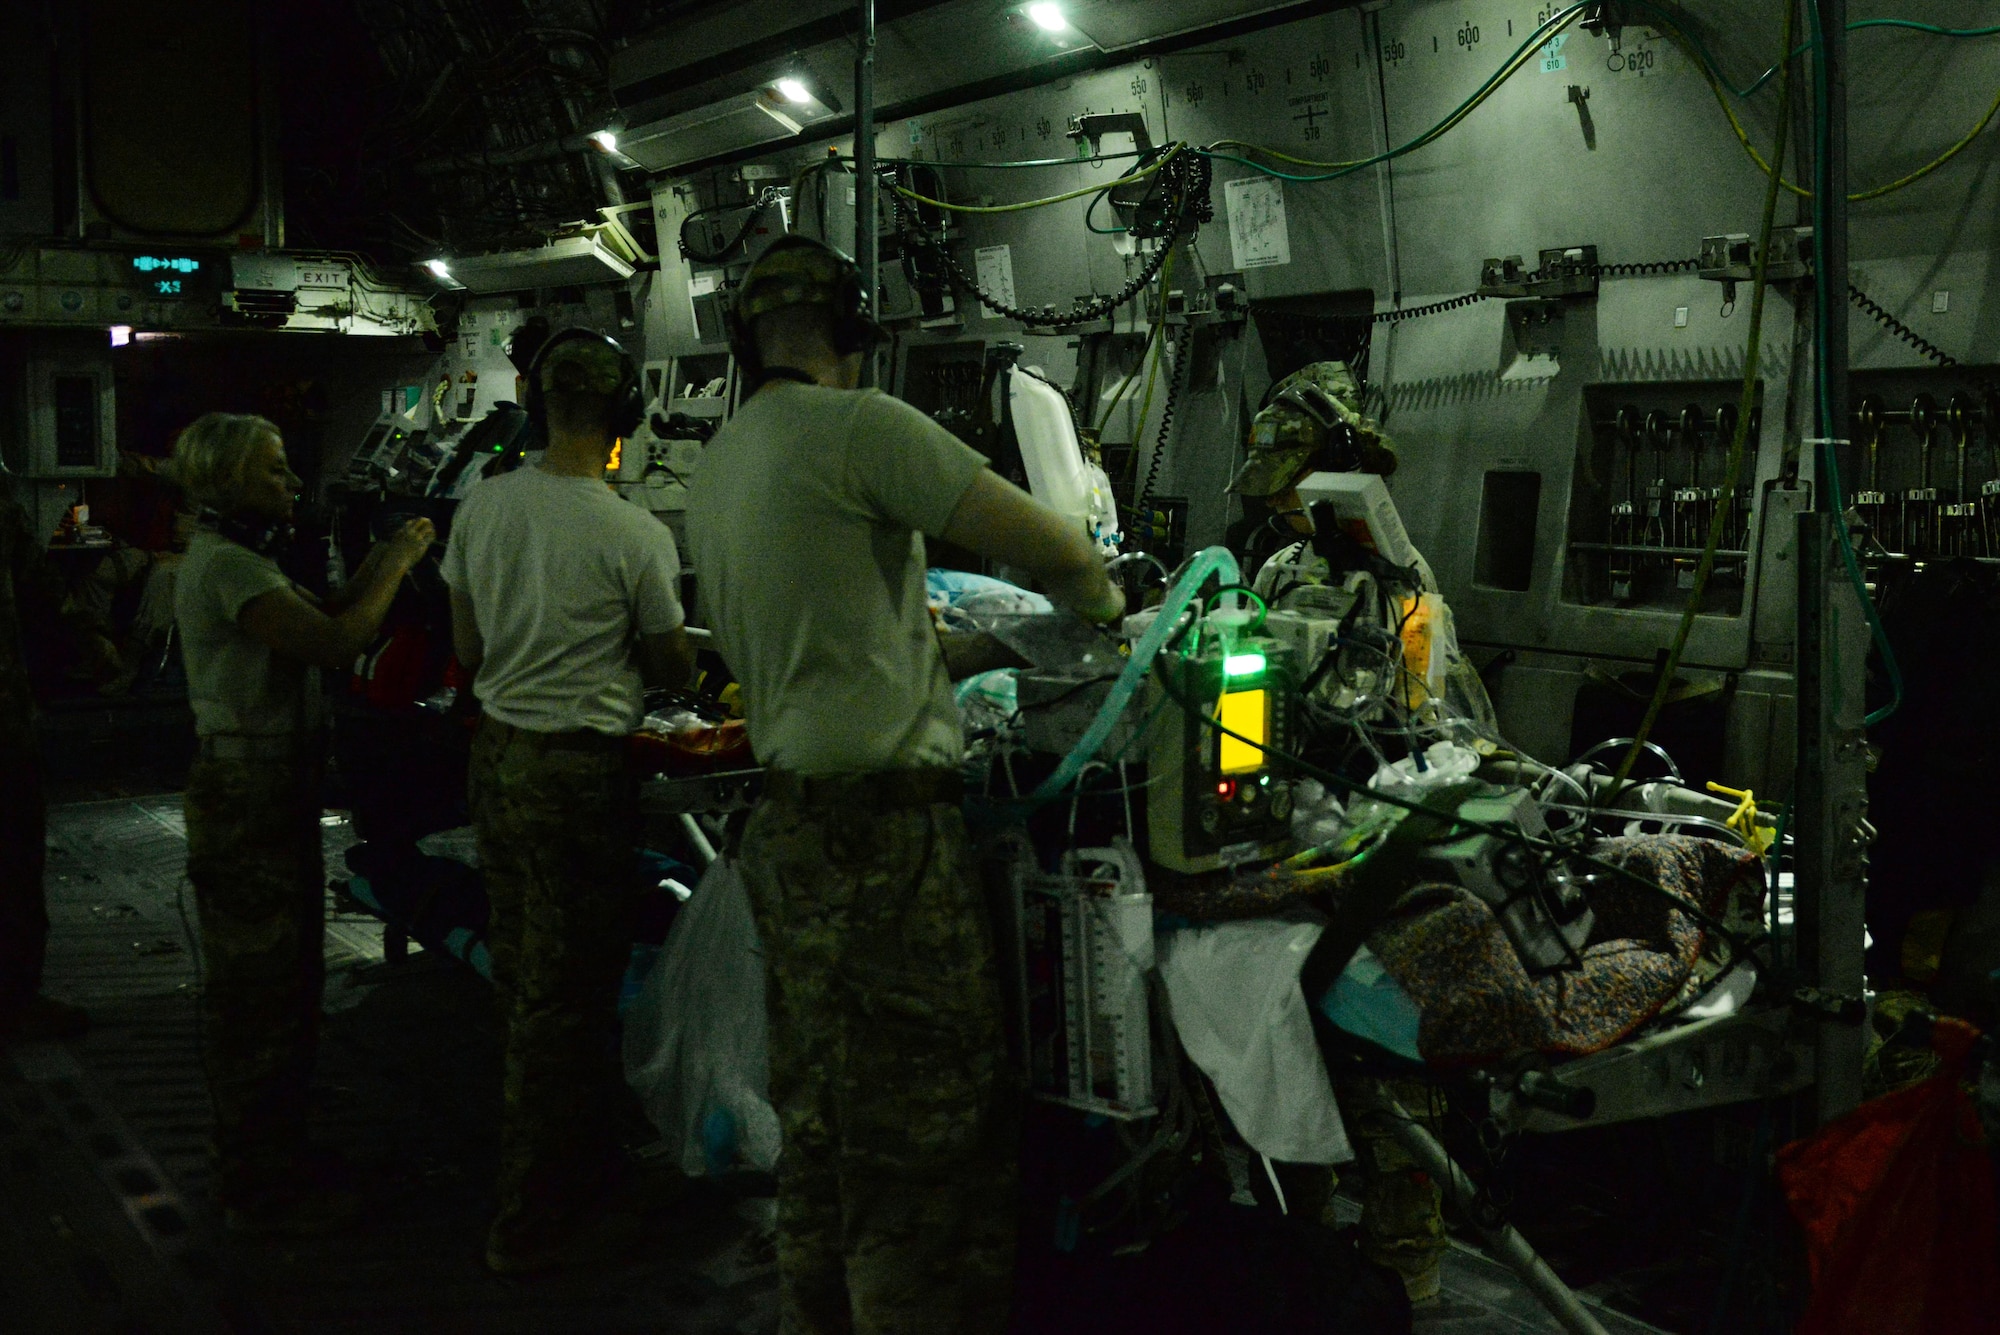 U.S. Airmen assigned to the 455th Expeditionary Aeromedical Evacuation Squadron provide in flight medical care to injured Service members on a C-17 Globemaster III aircraft that departed Bagram Airfield, Afghanistan, heading for medical care in Germany, Aug. 9, 2015.  The 455th EAES Airmen are charged with the responsibility of evacuating the sick and wounded from Central Command to higher echelons of medical care. (U.S. Air Force photo by Maj. Tony Wickman/Released) 